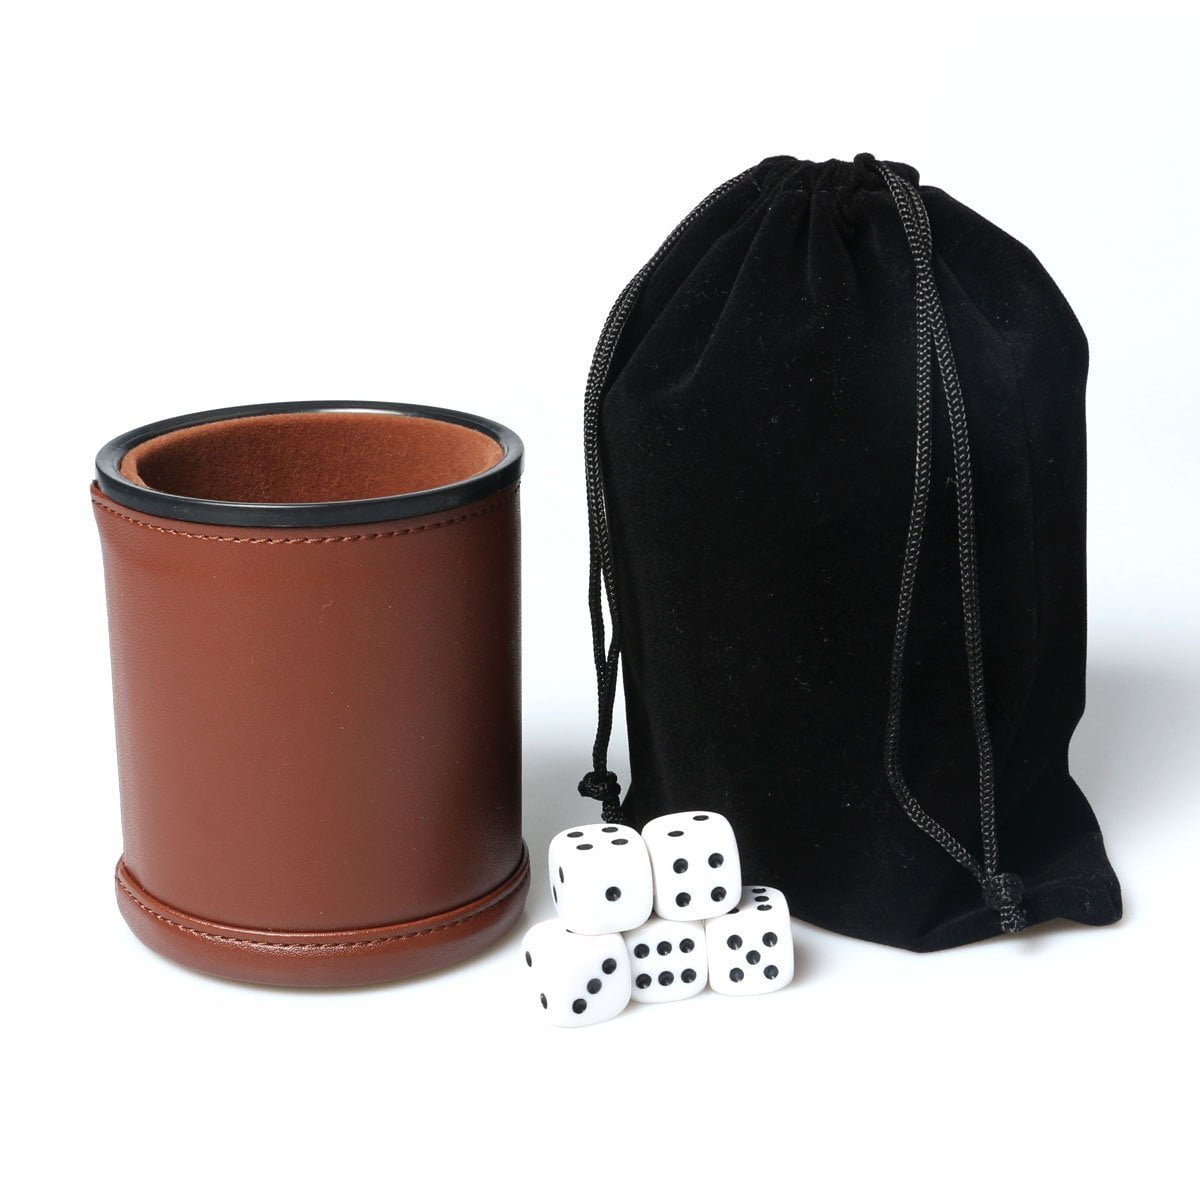 5 Pack PU Leather Dice Cup Set with 6 Dot Dices Felt Lined Quiet Shaker Red